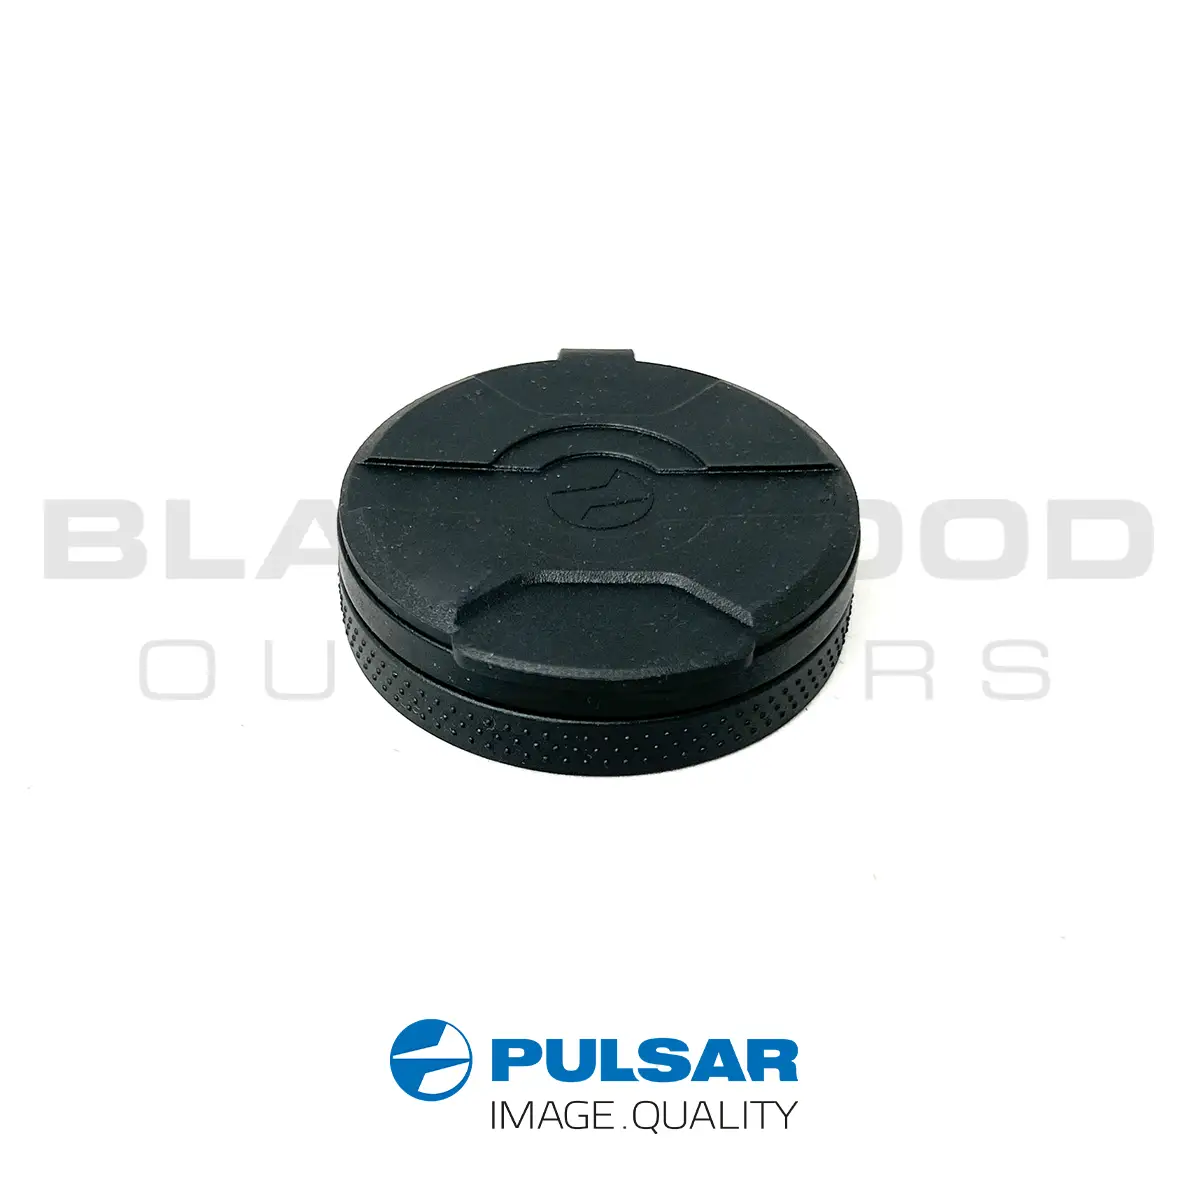 Pulsar Merger Lens Cap Replacement for XP50, XL50 and XQ35 Models